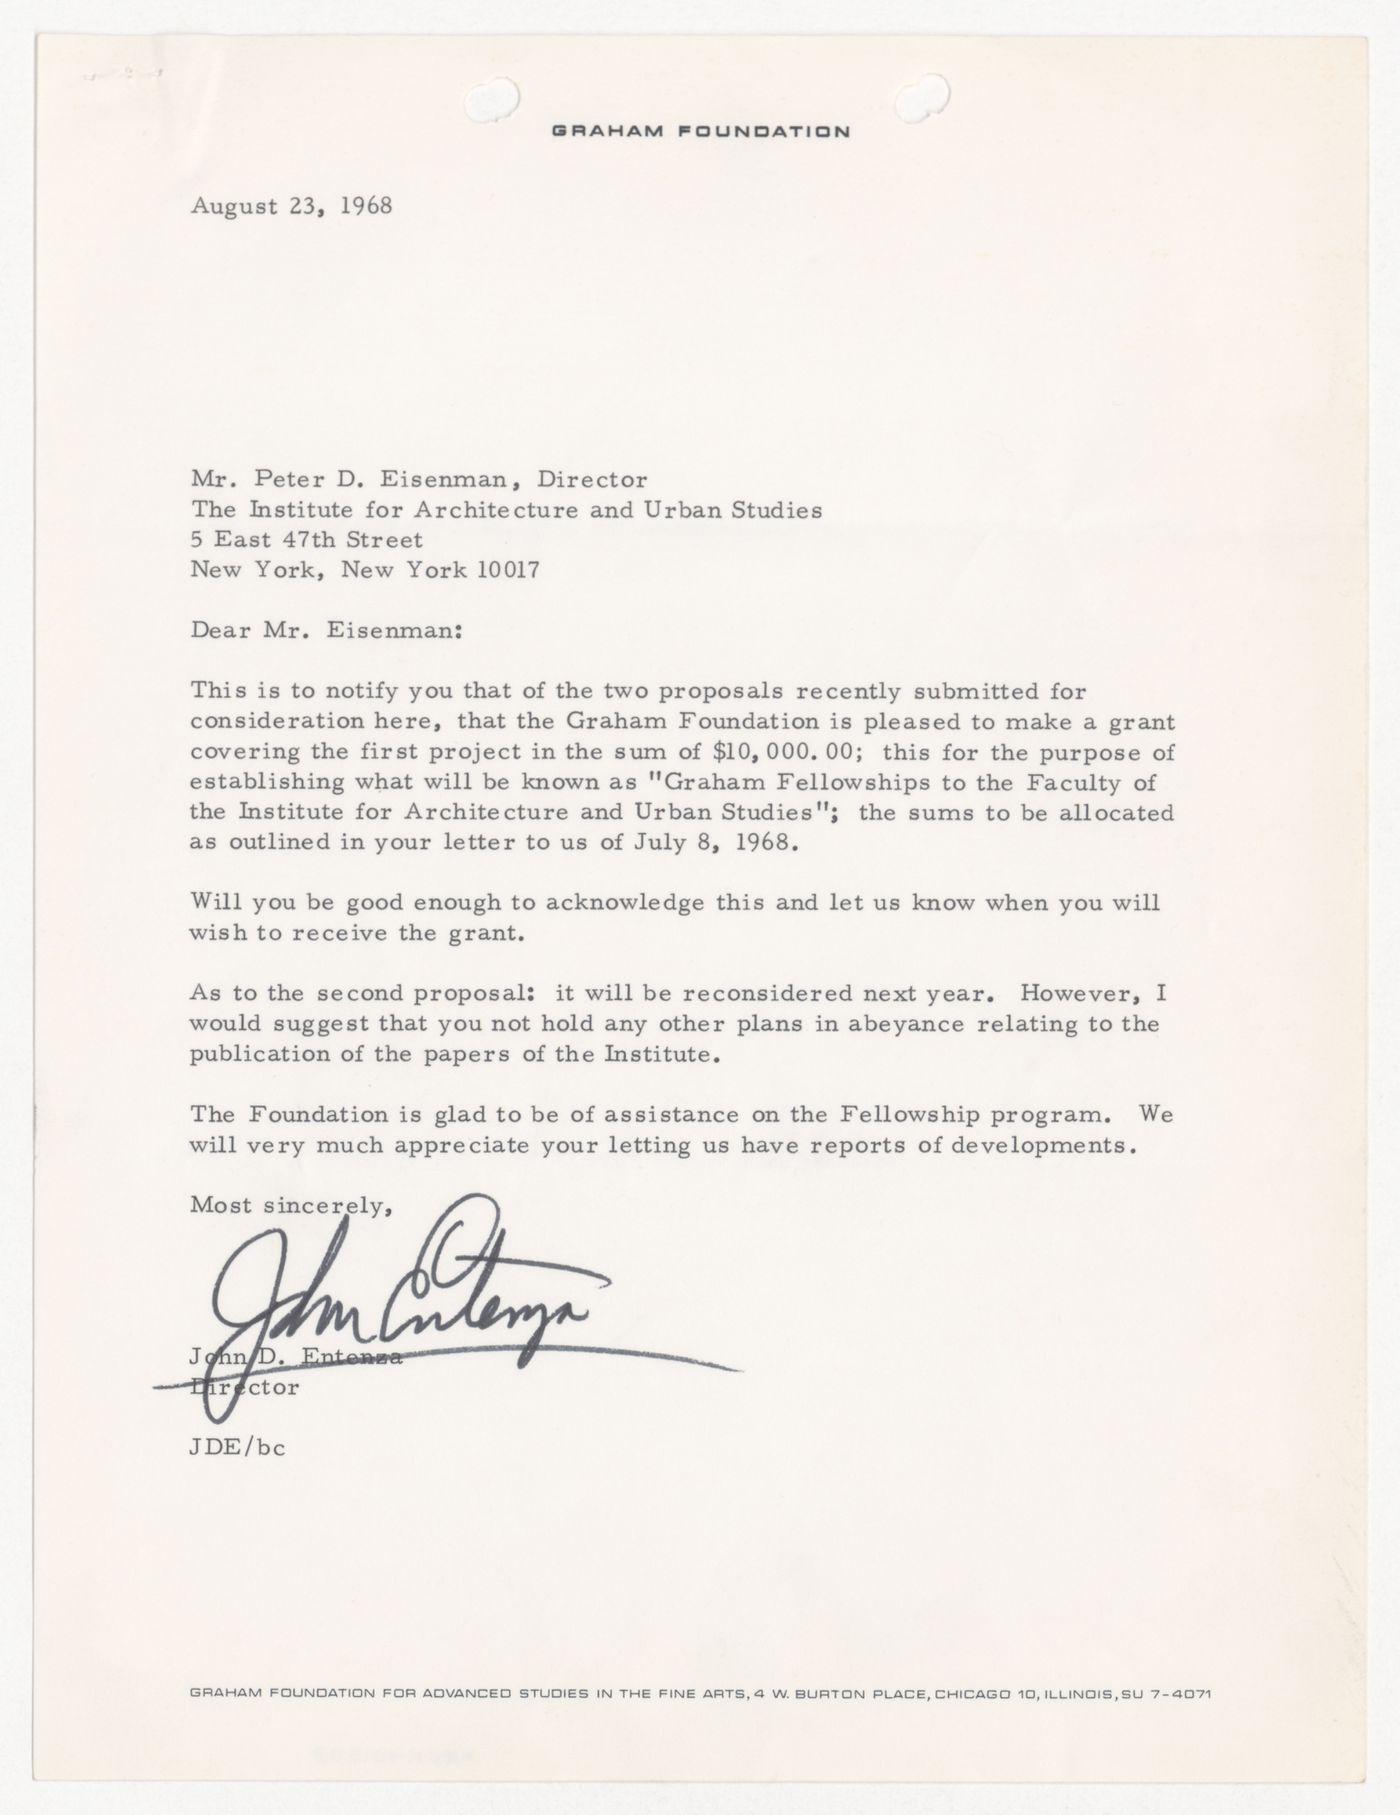 Letter from John D. Entenza to Peter D. Eisenman about grants from the Graham Foundation